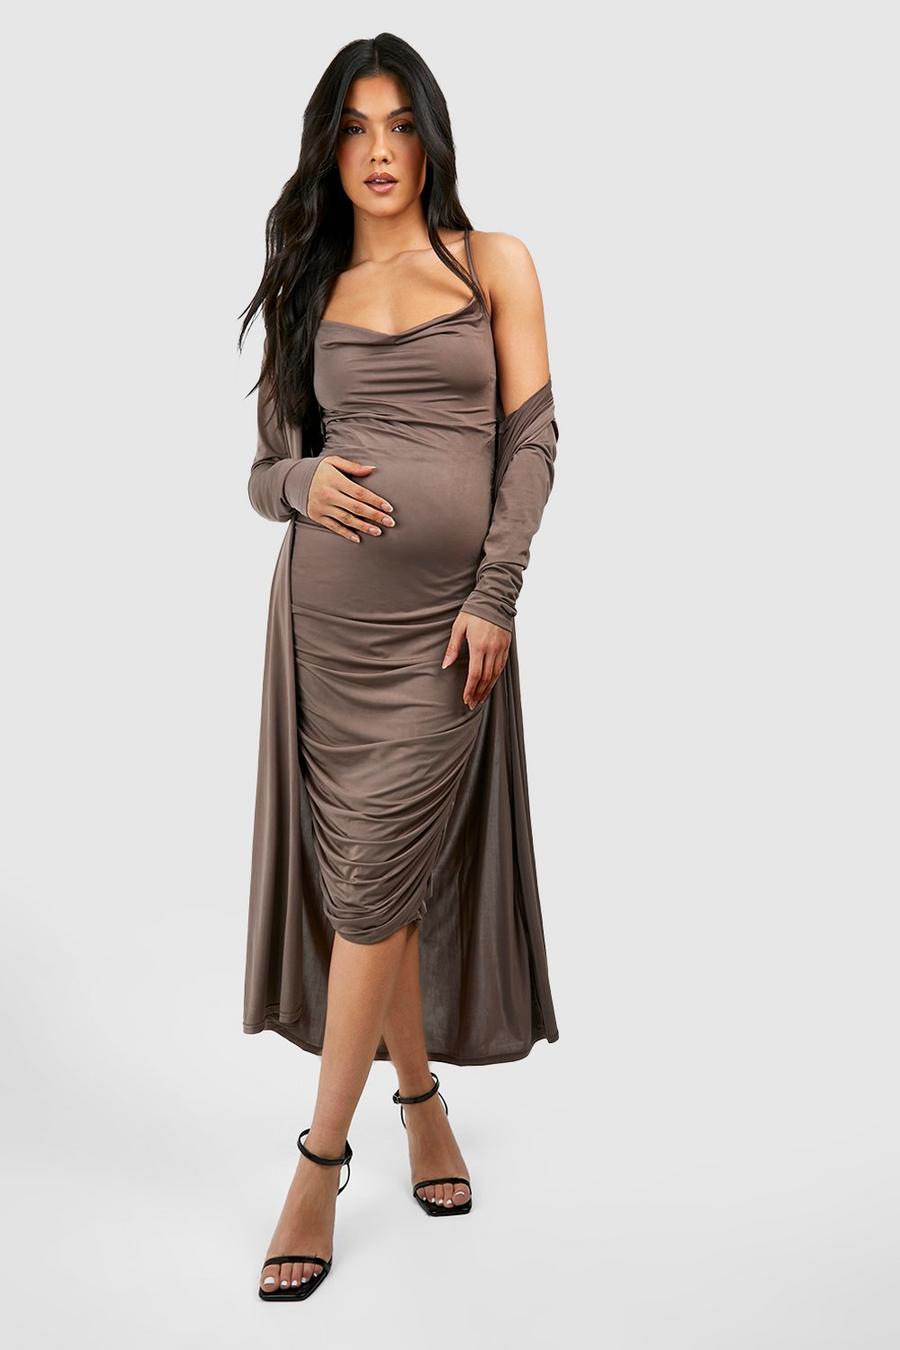 Maternity Strappy Cowl Neck Dress And Duster Coat